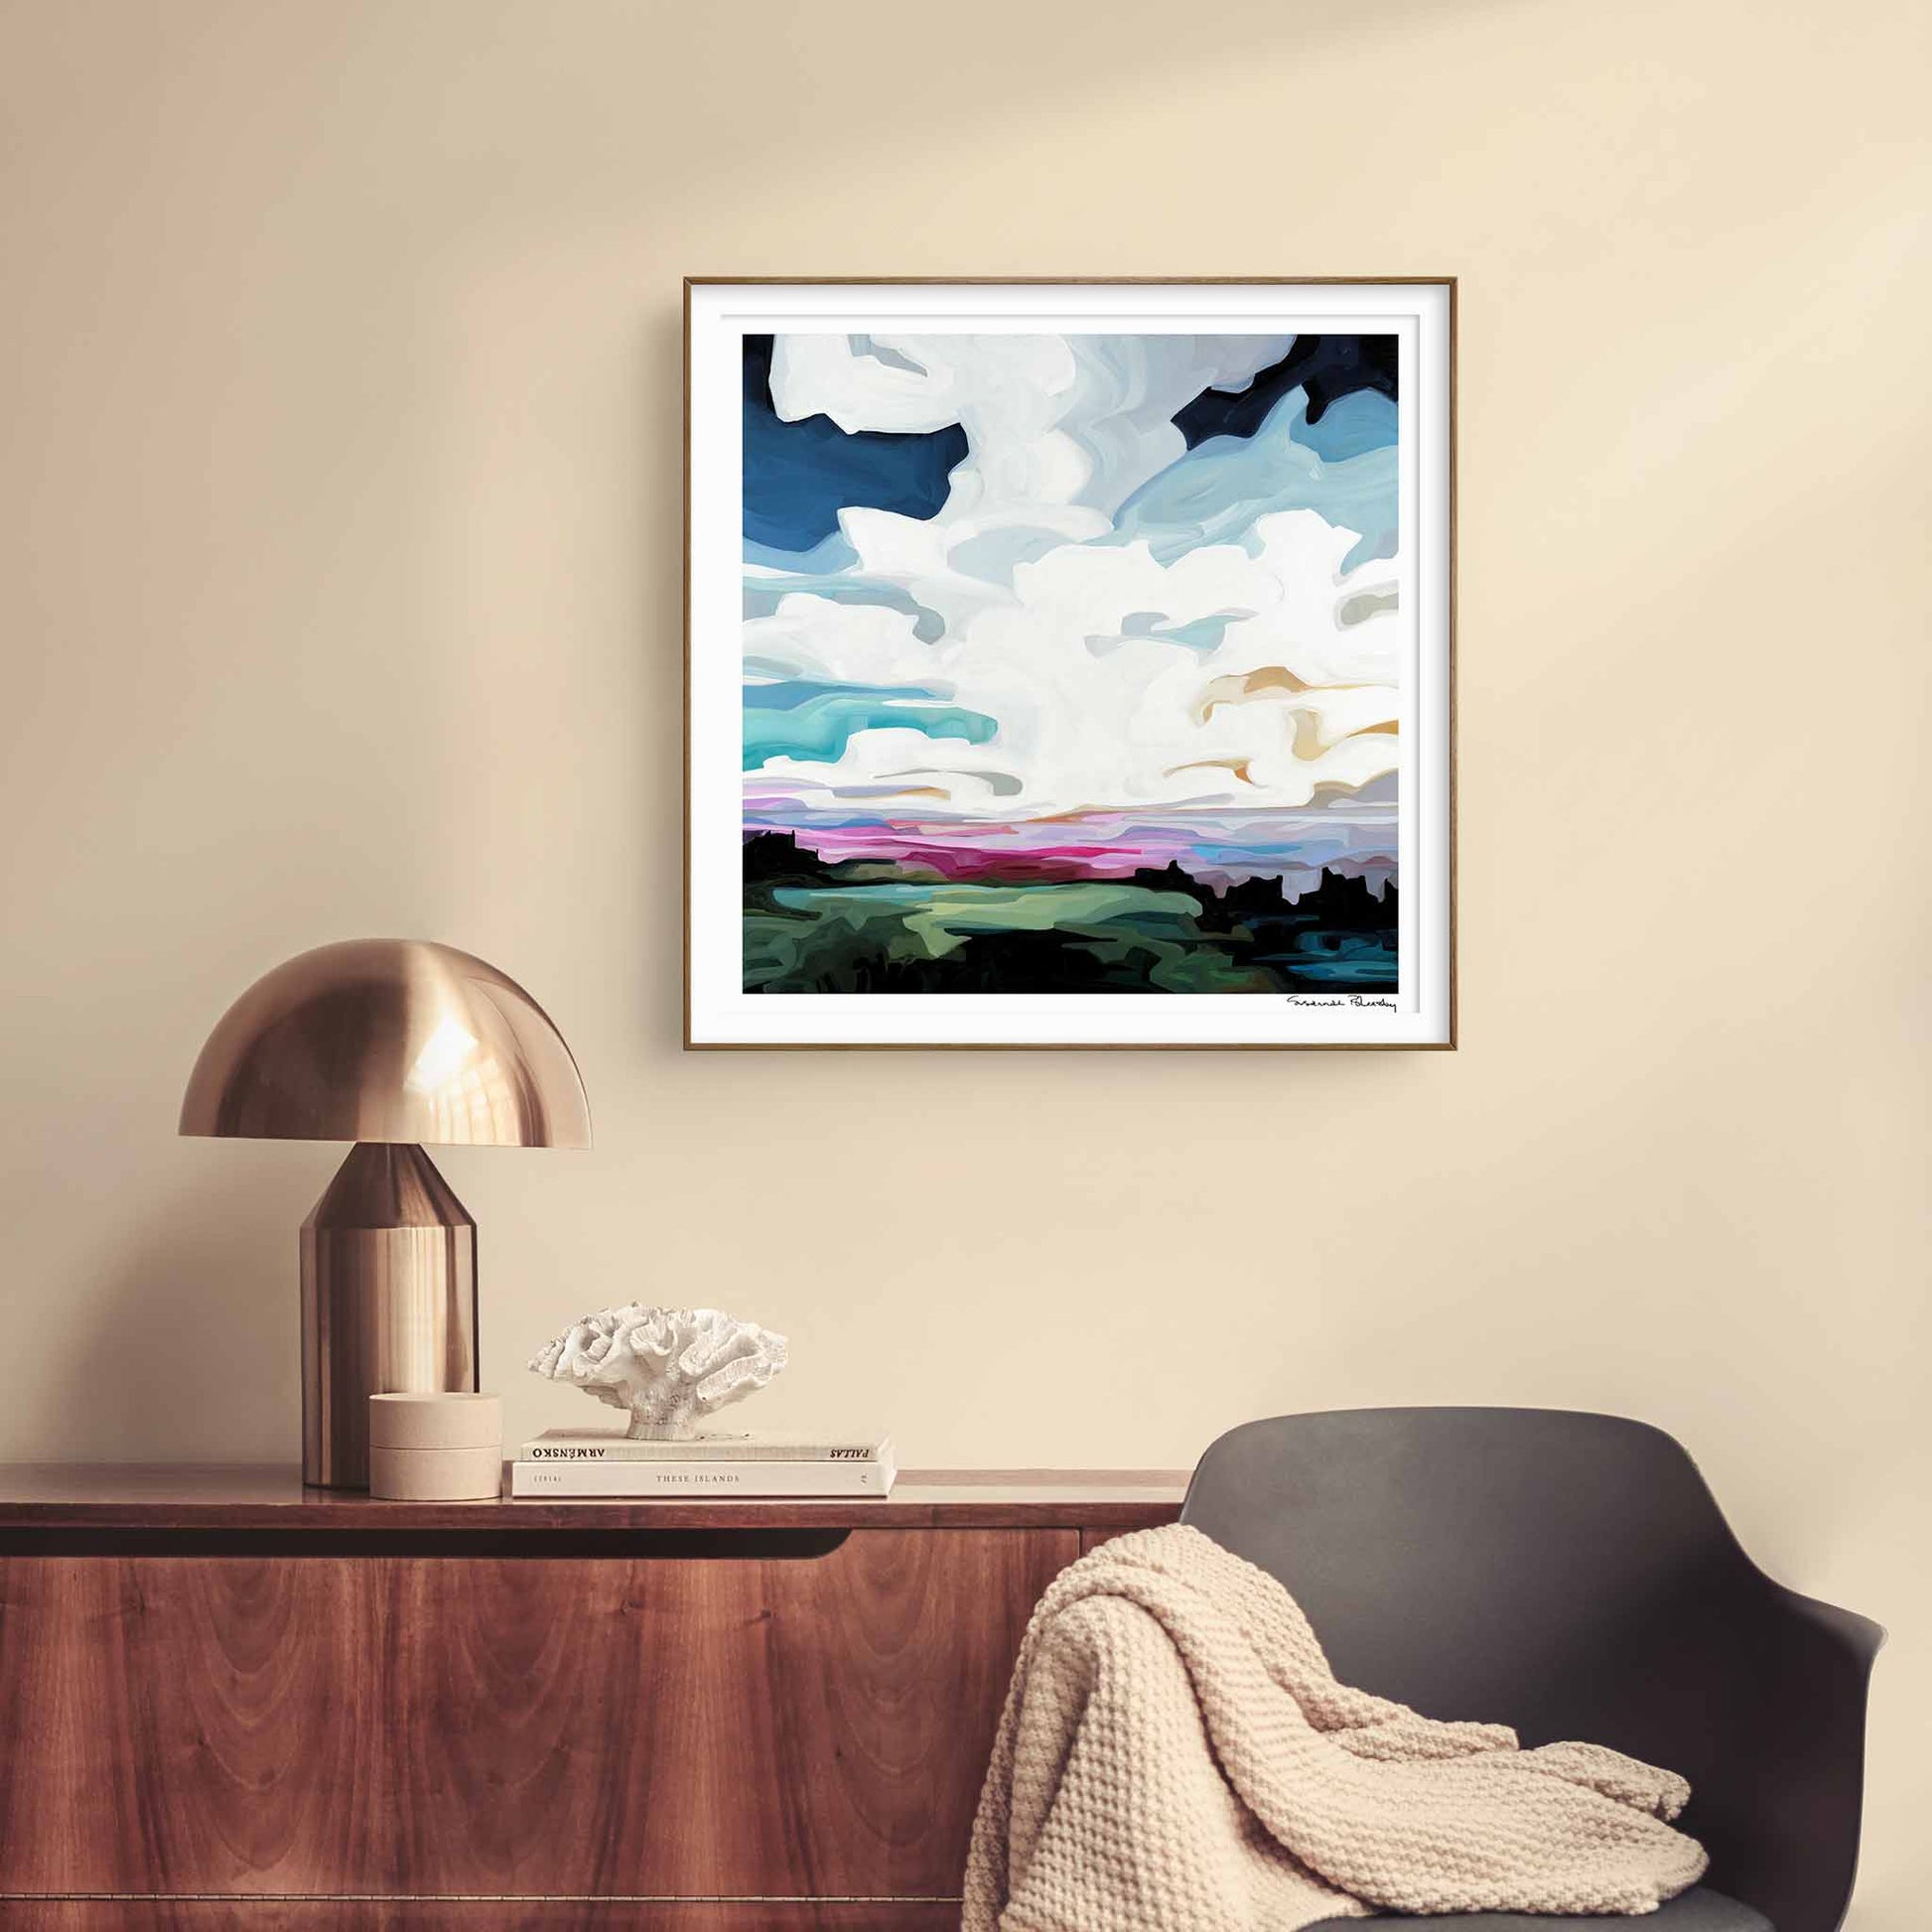 absatract sky painting wall art print 24x24